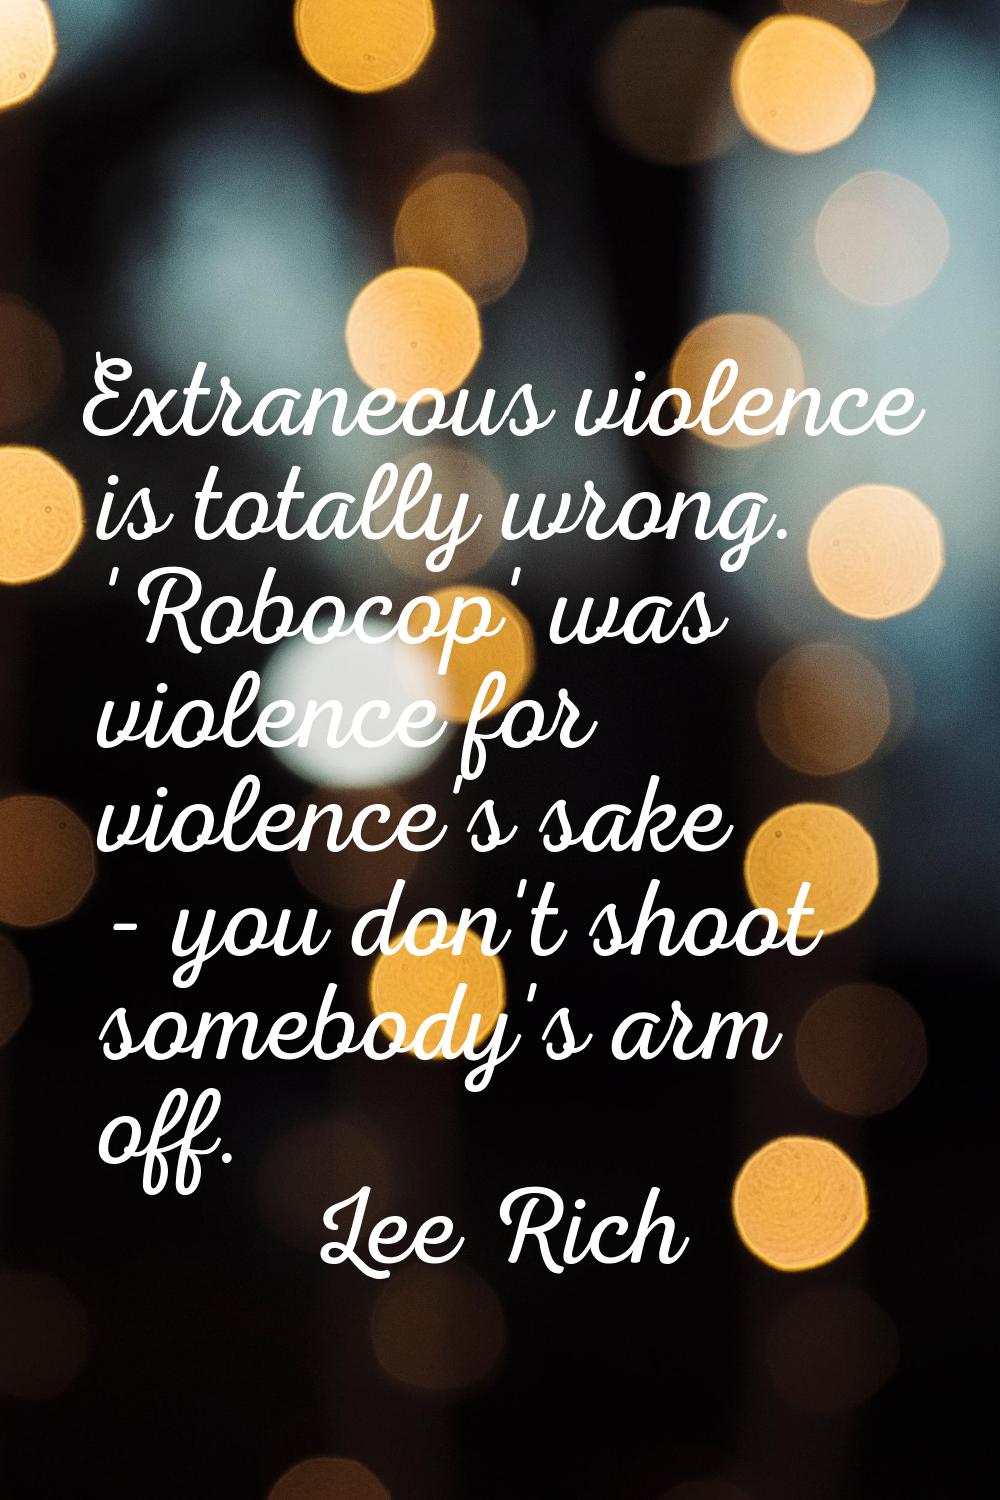 Extraneous violence is totally wrong. 'Robocop' was violence for violence's sake - you don't shoot 